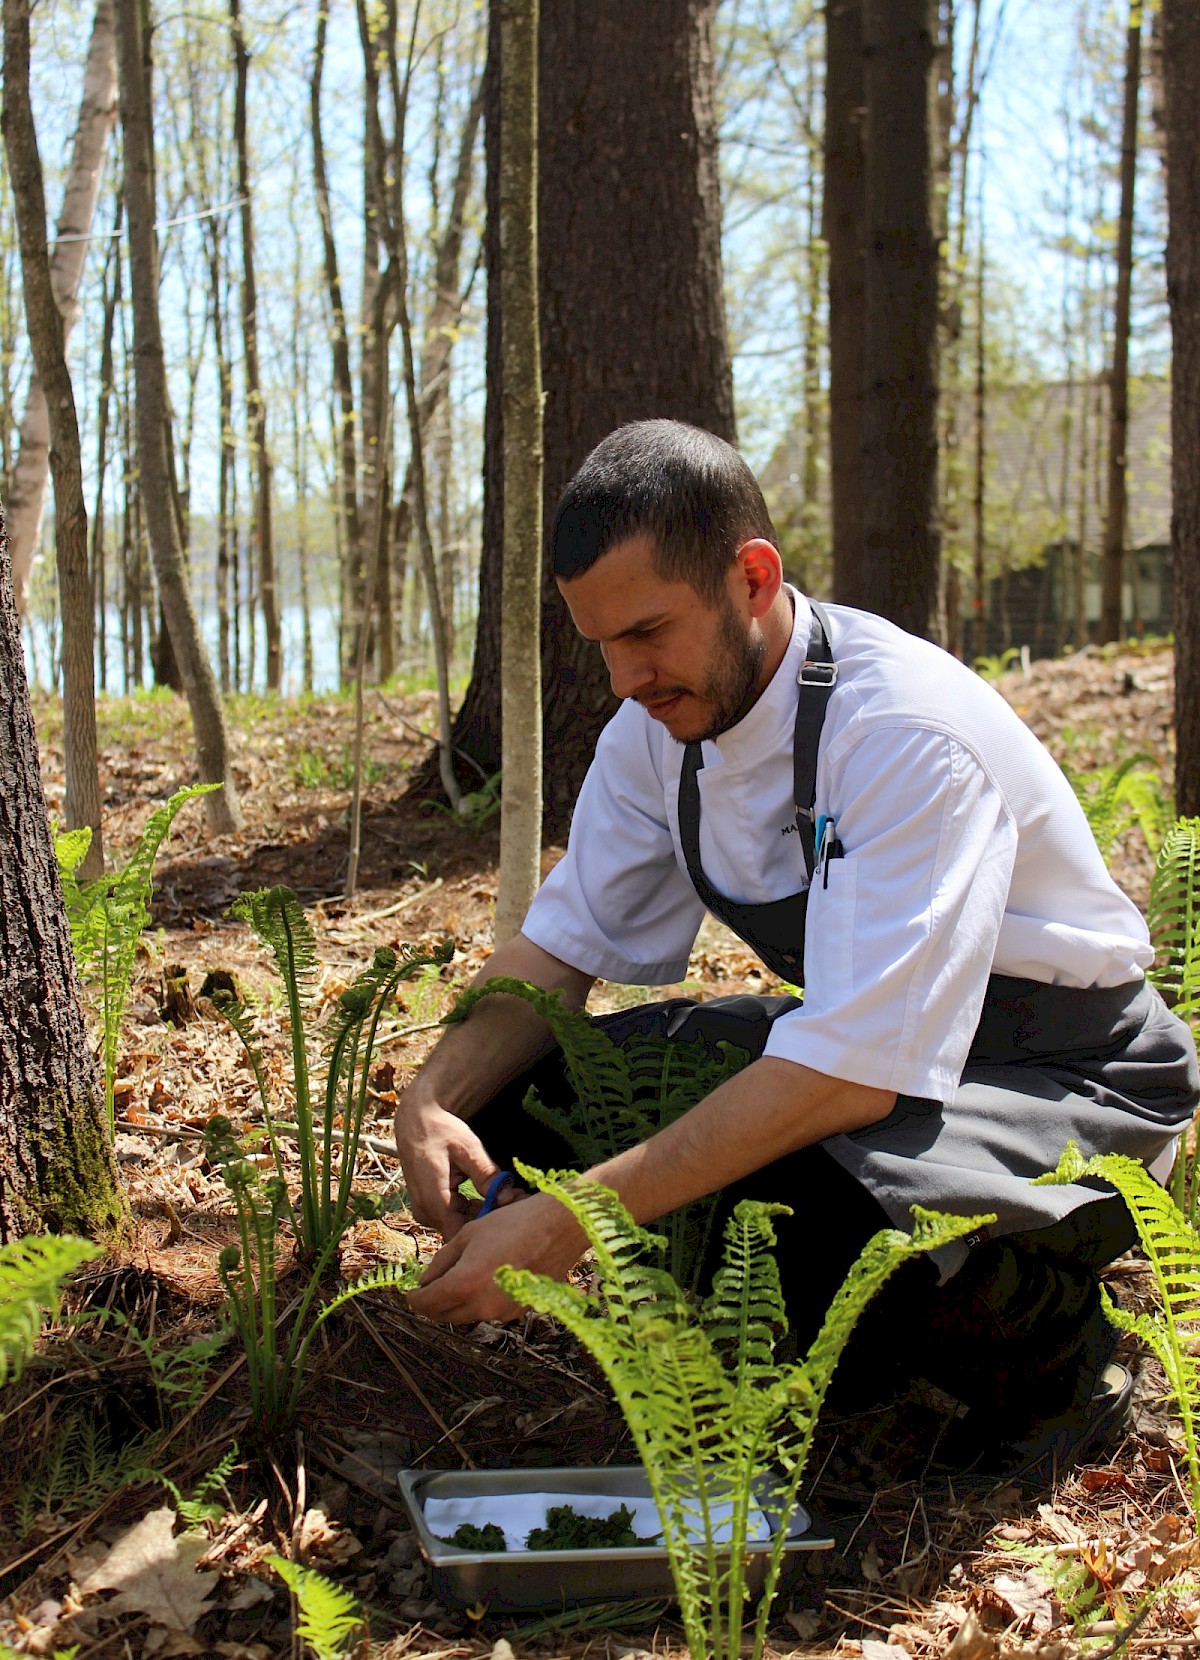 The Chef is cutting fresh herbs in the forest